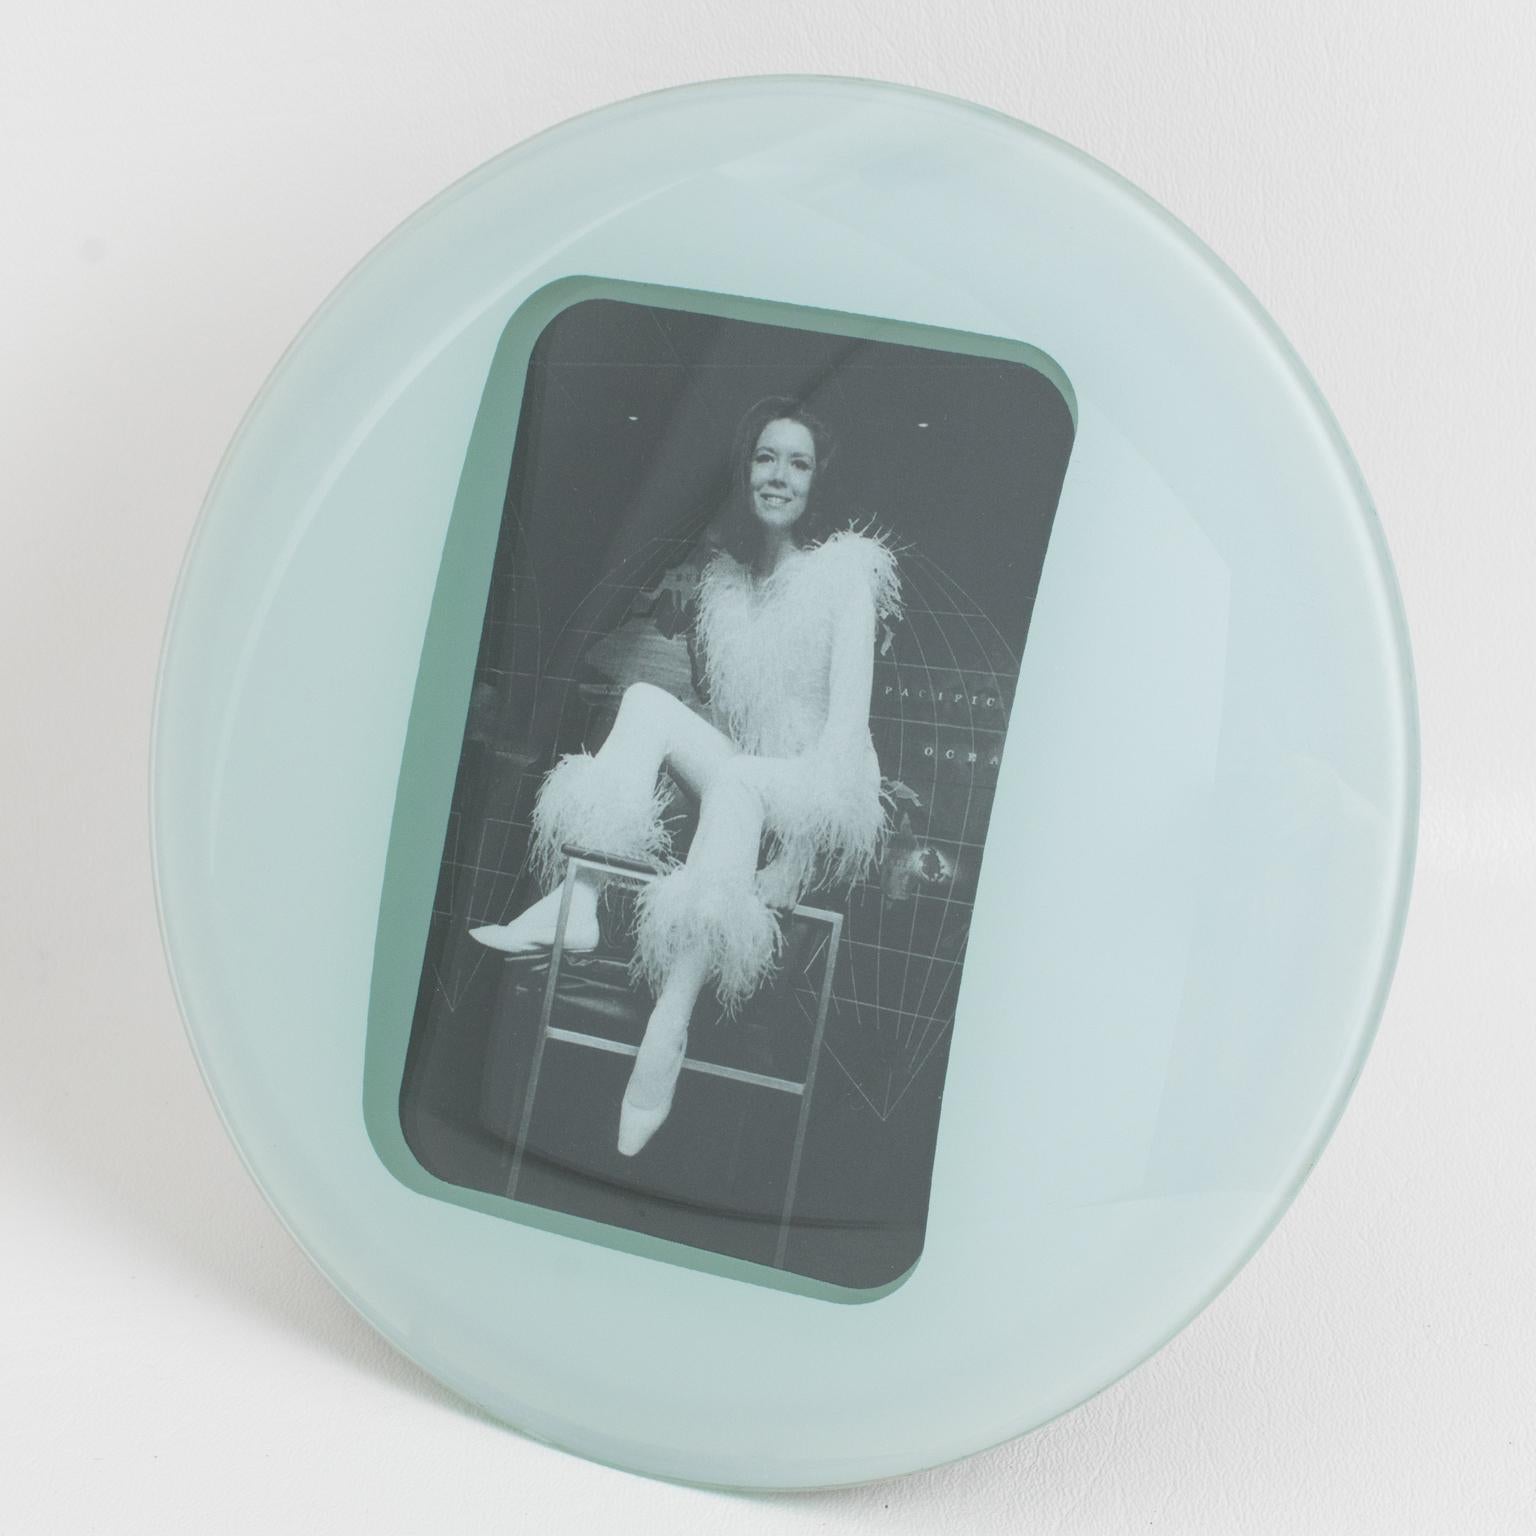 Lovely 1960s Space Age arctic white glass picture photo frame. Round domed design with kinetic effect. Easel and back covered with black paper. The picture photo frame can only be placed in a portrait position. There is no visible maker's